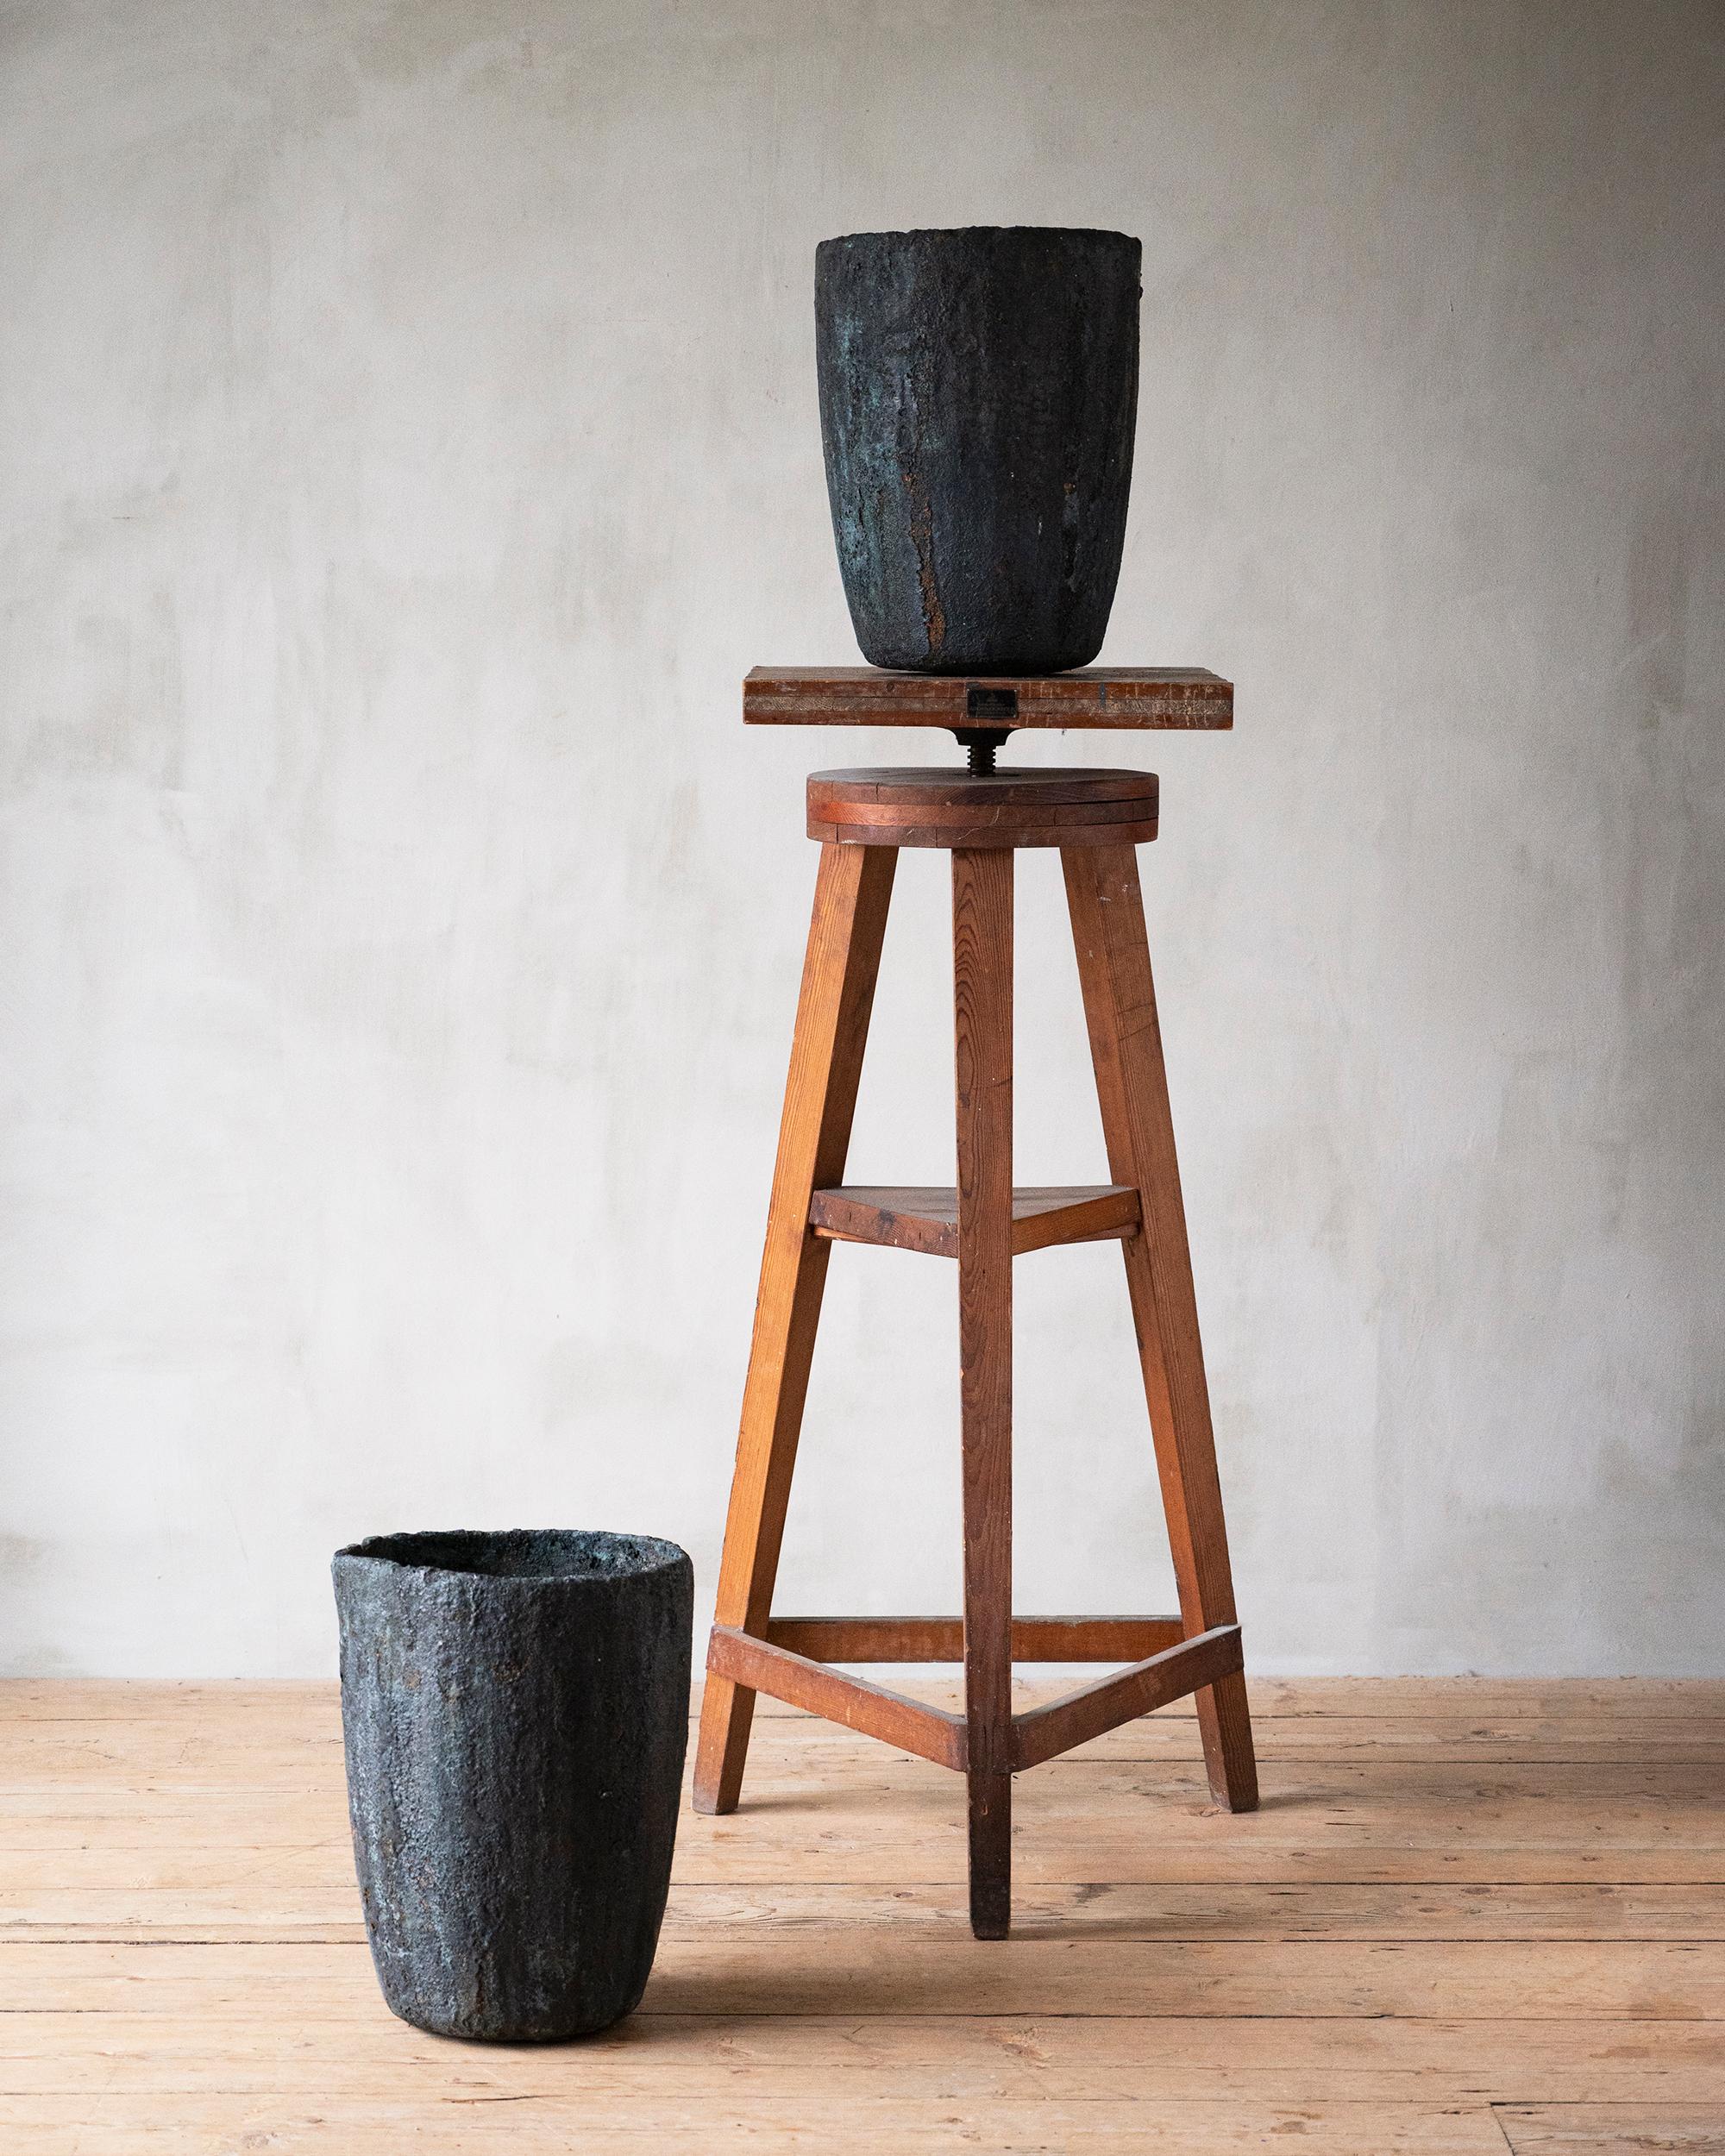 Good pair of mid to late 19th century factory Crucibles with fantastic patina. Ca 1850-90 Sweden, 